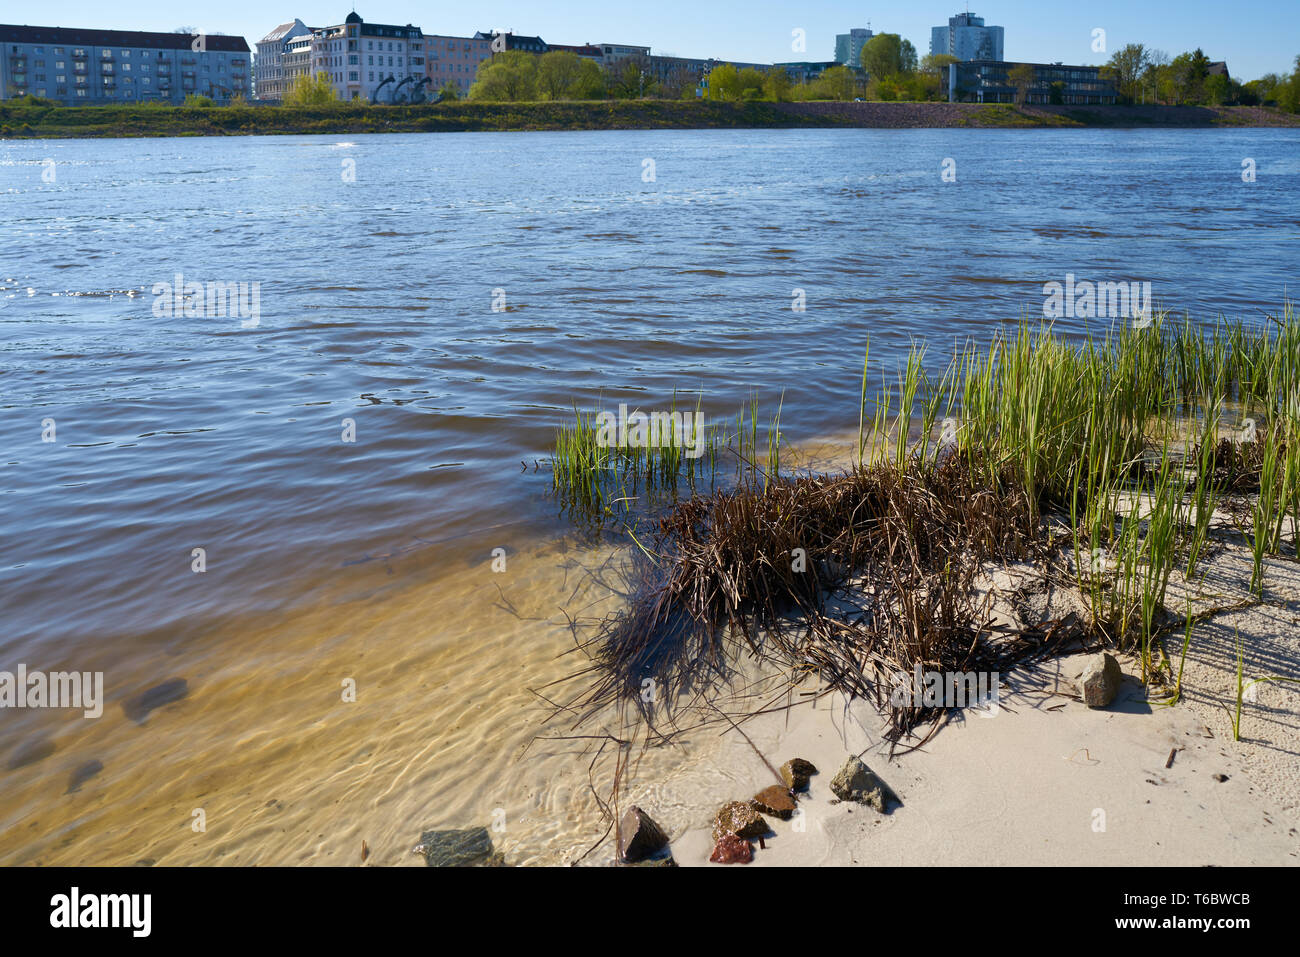 On the banks of the river Elbe near Magdeburg Stock Photo